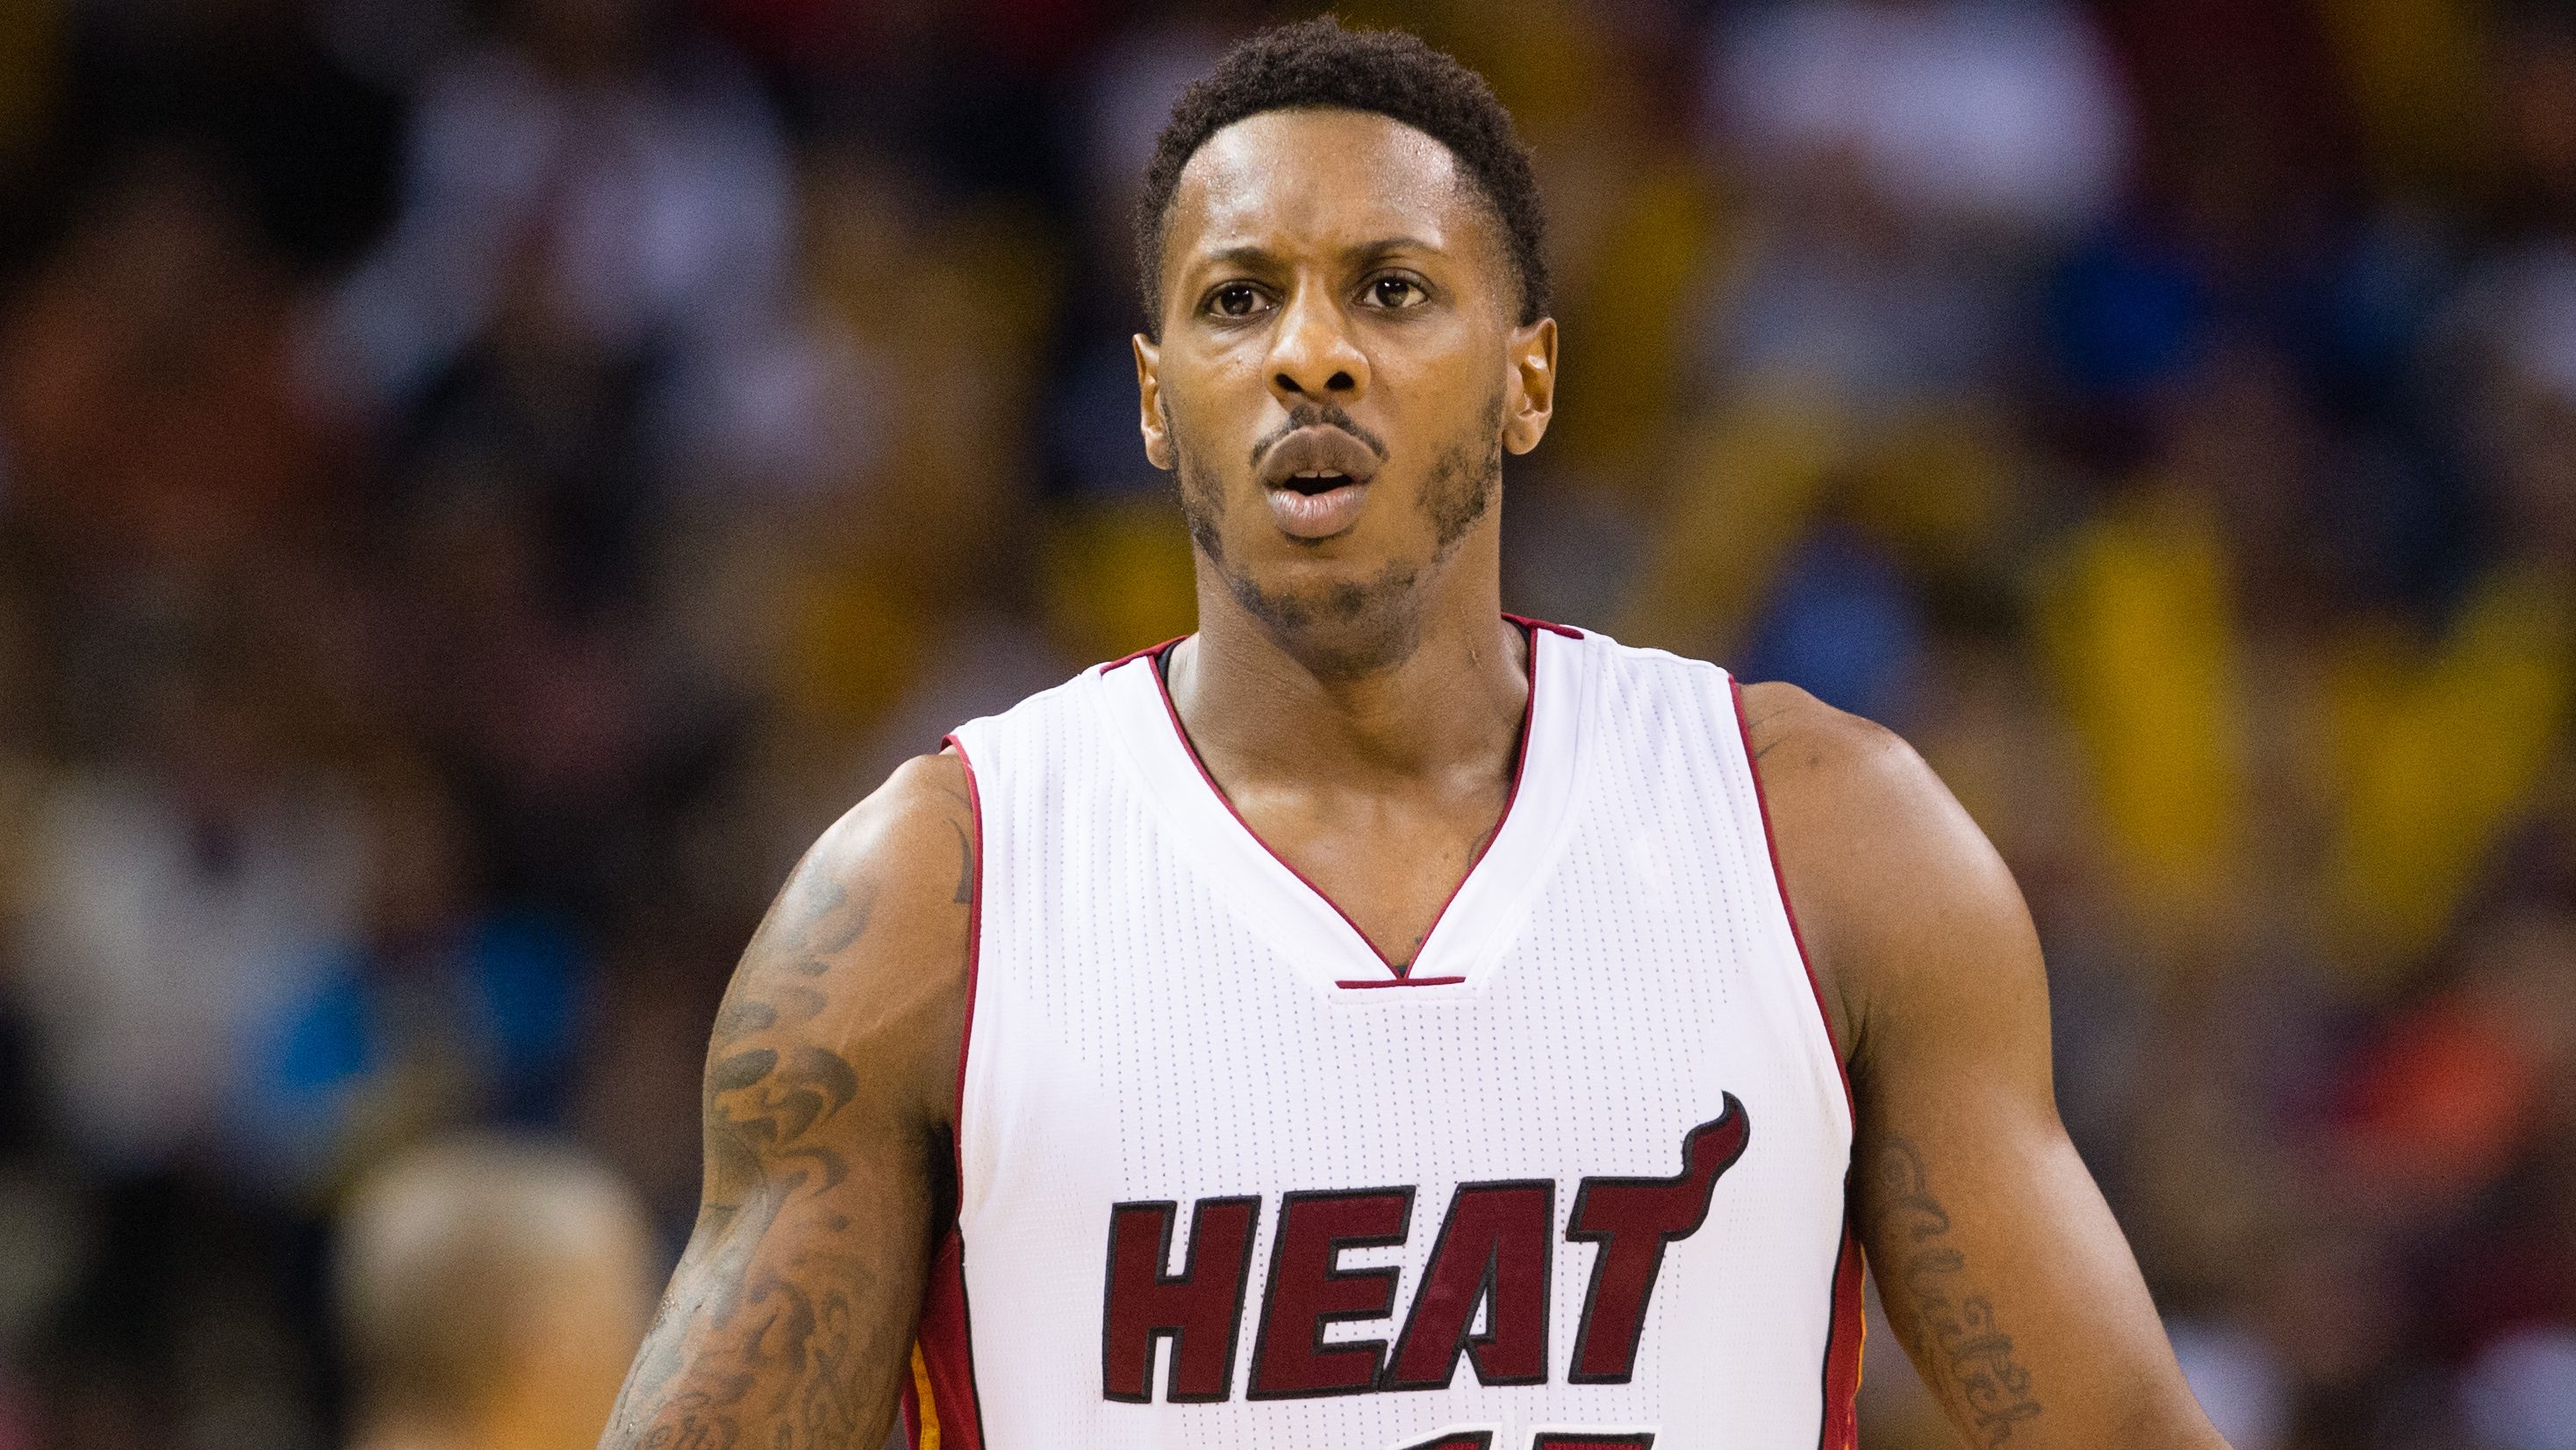 Mario Chalmers Archives - Page 2 of 14 - Heat Nation